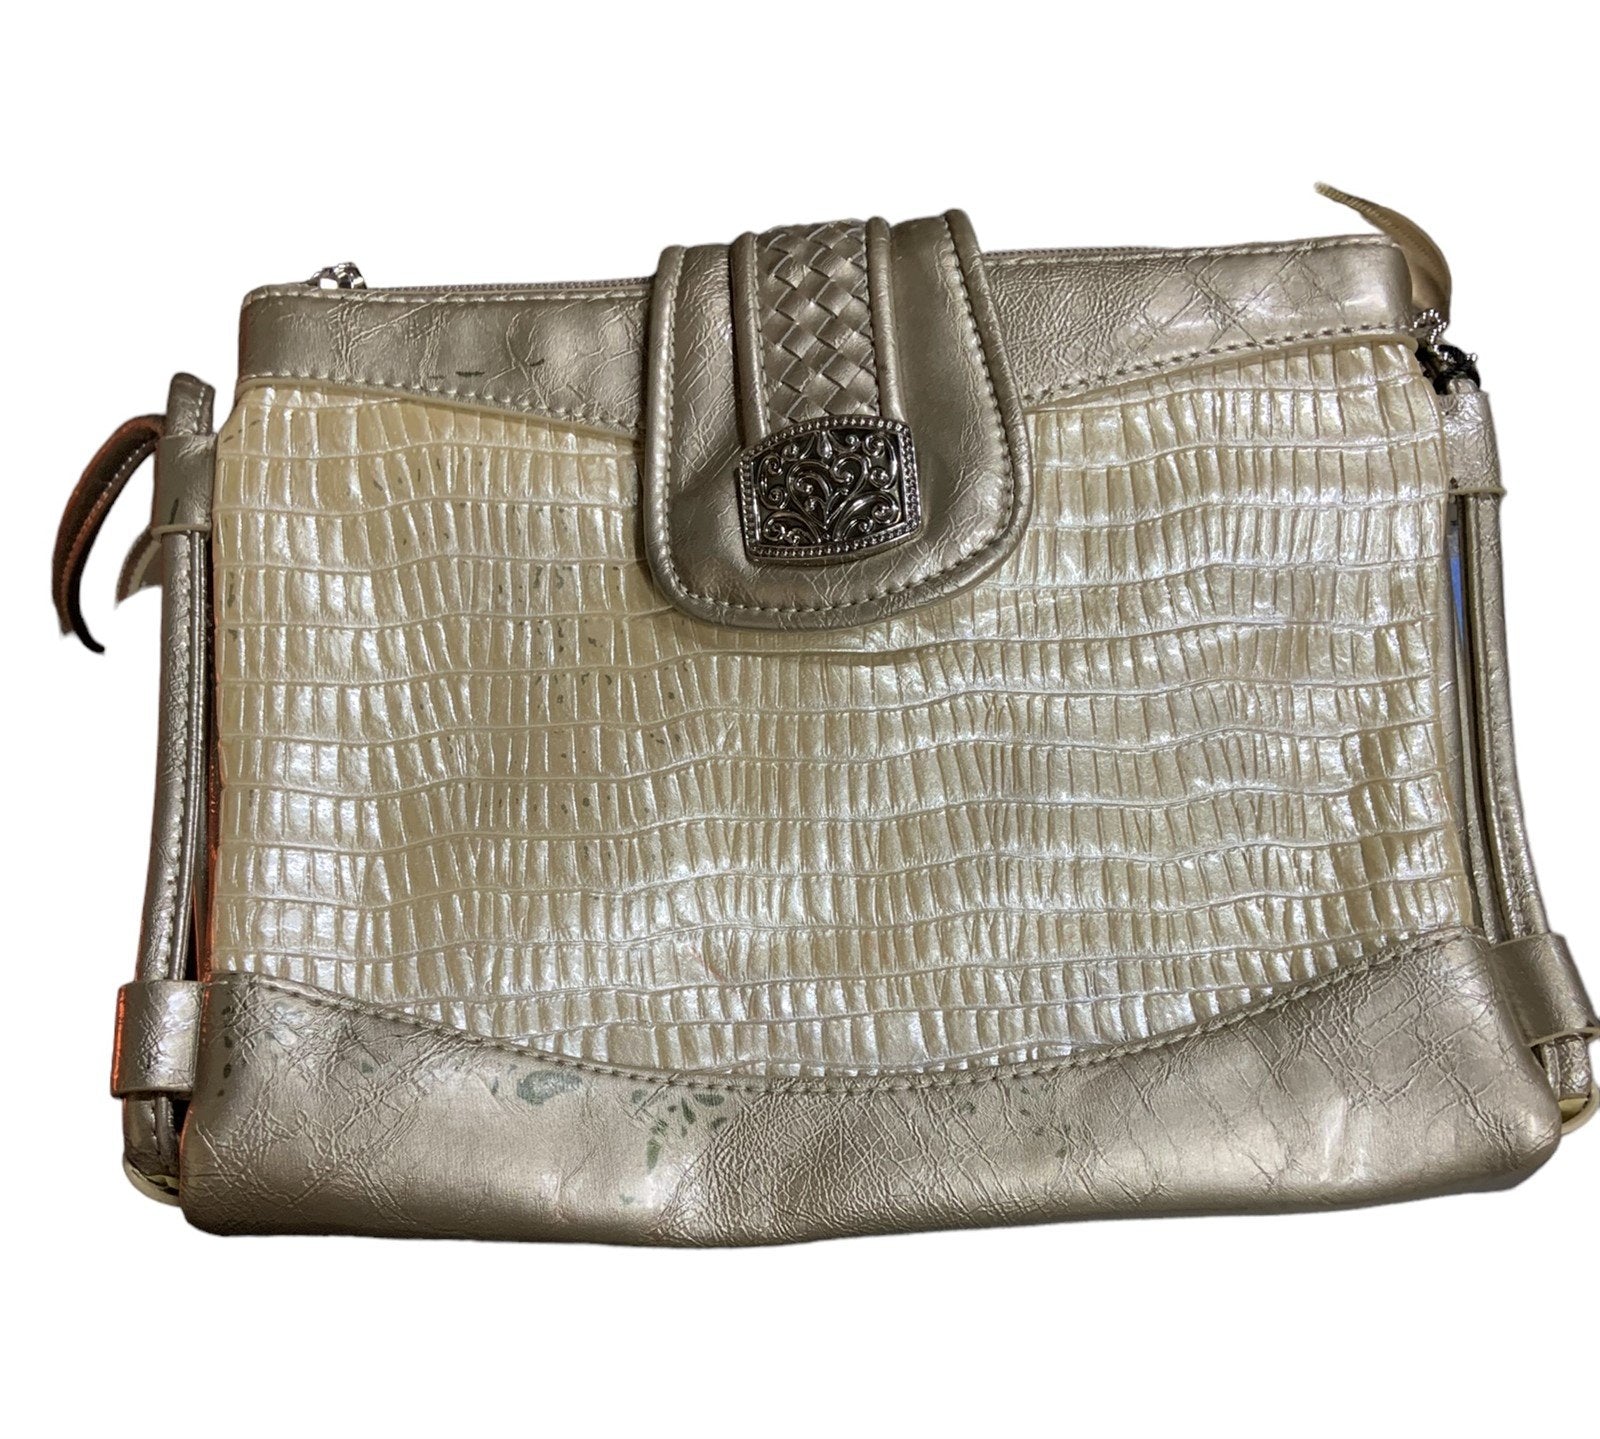 Baggs Purse Genuine Leather Pearl Taupe Multi Compartment Bag Vintage